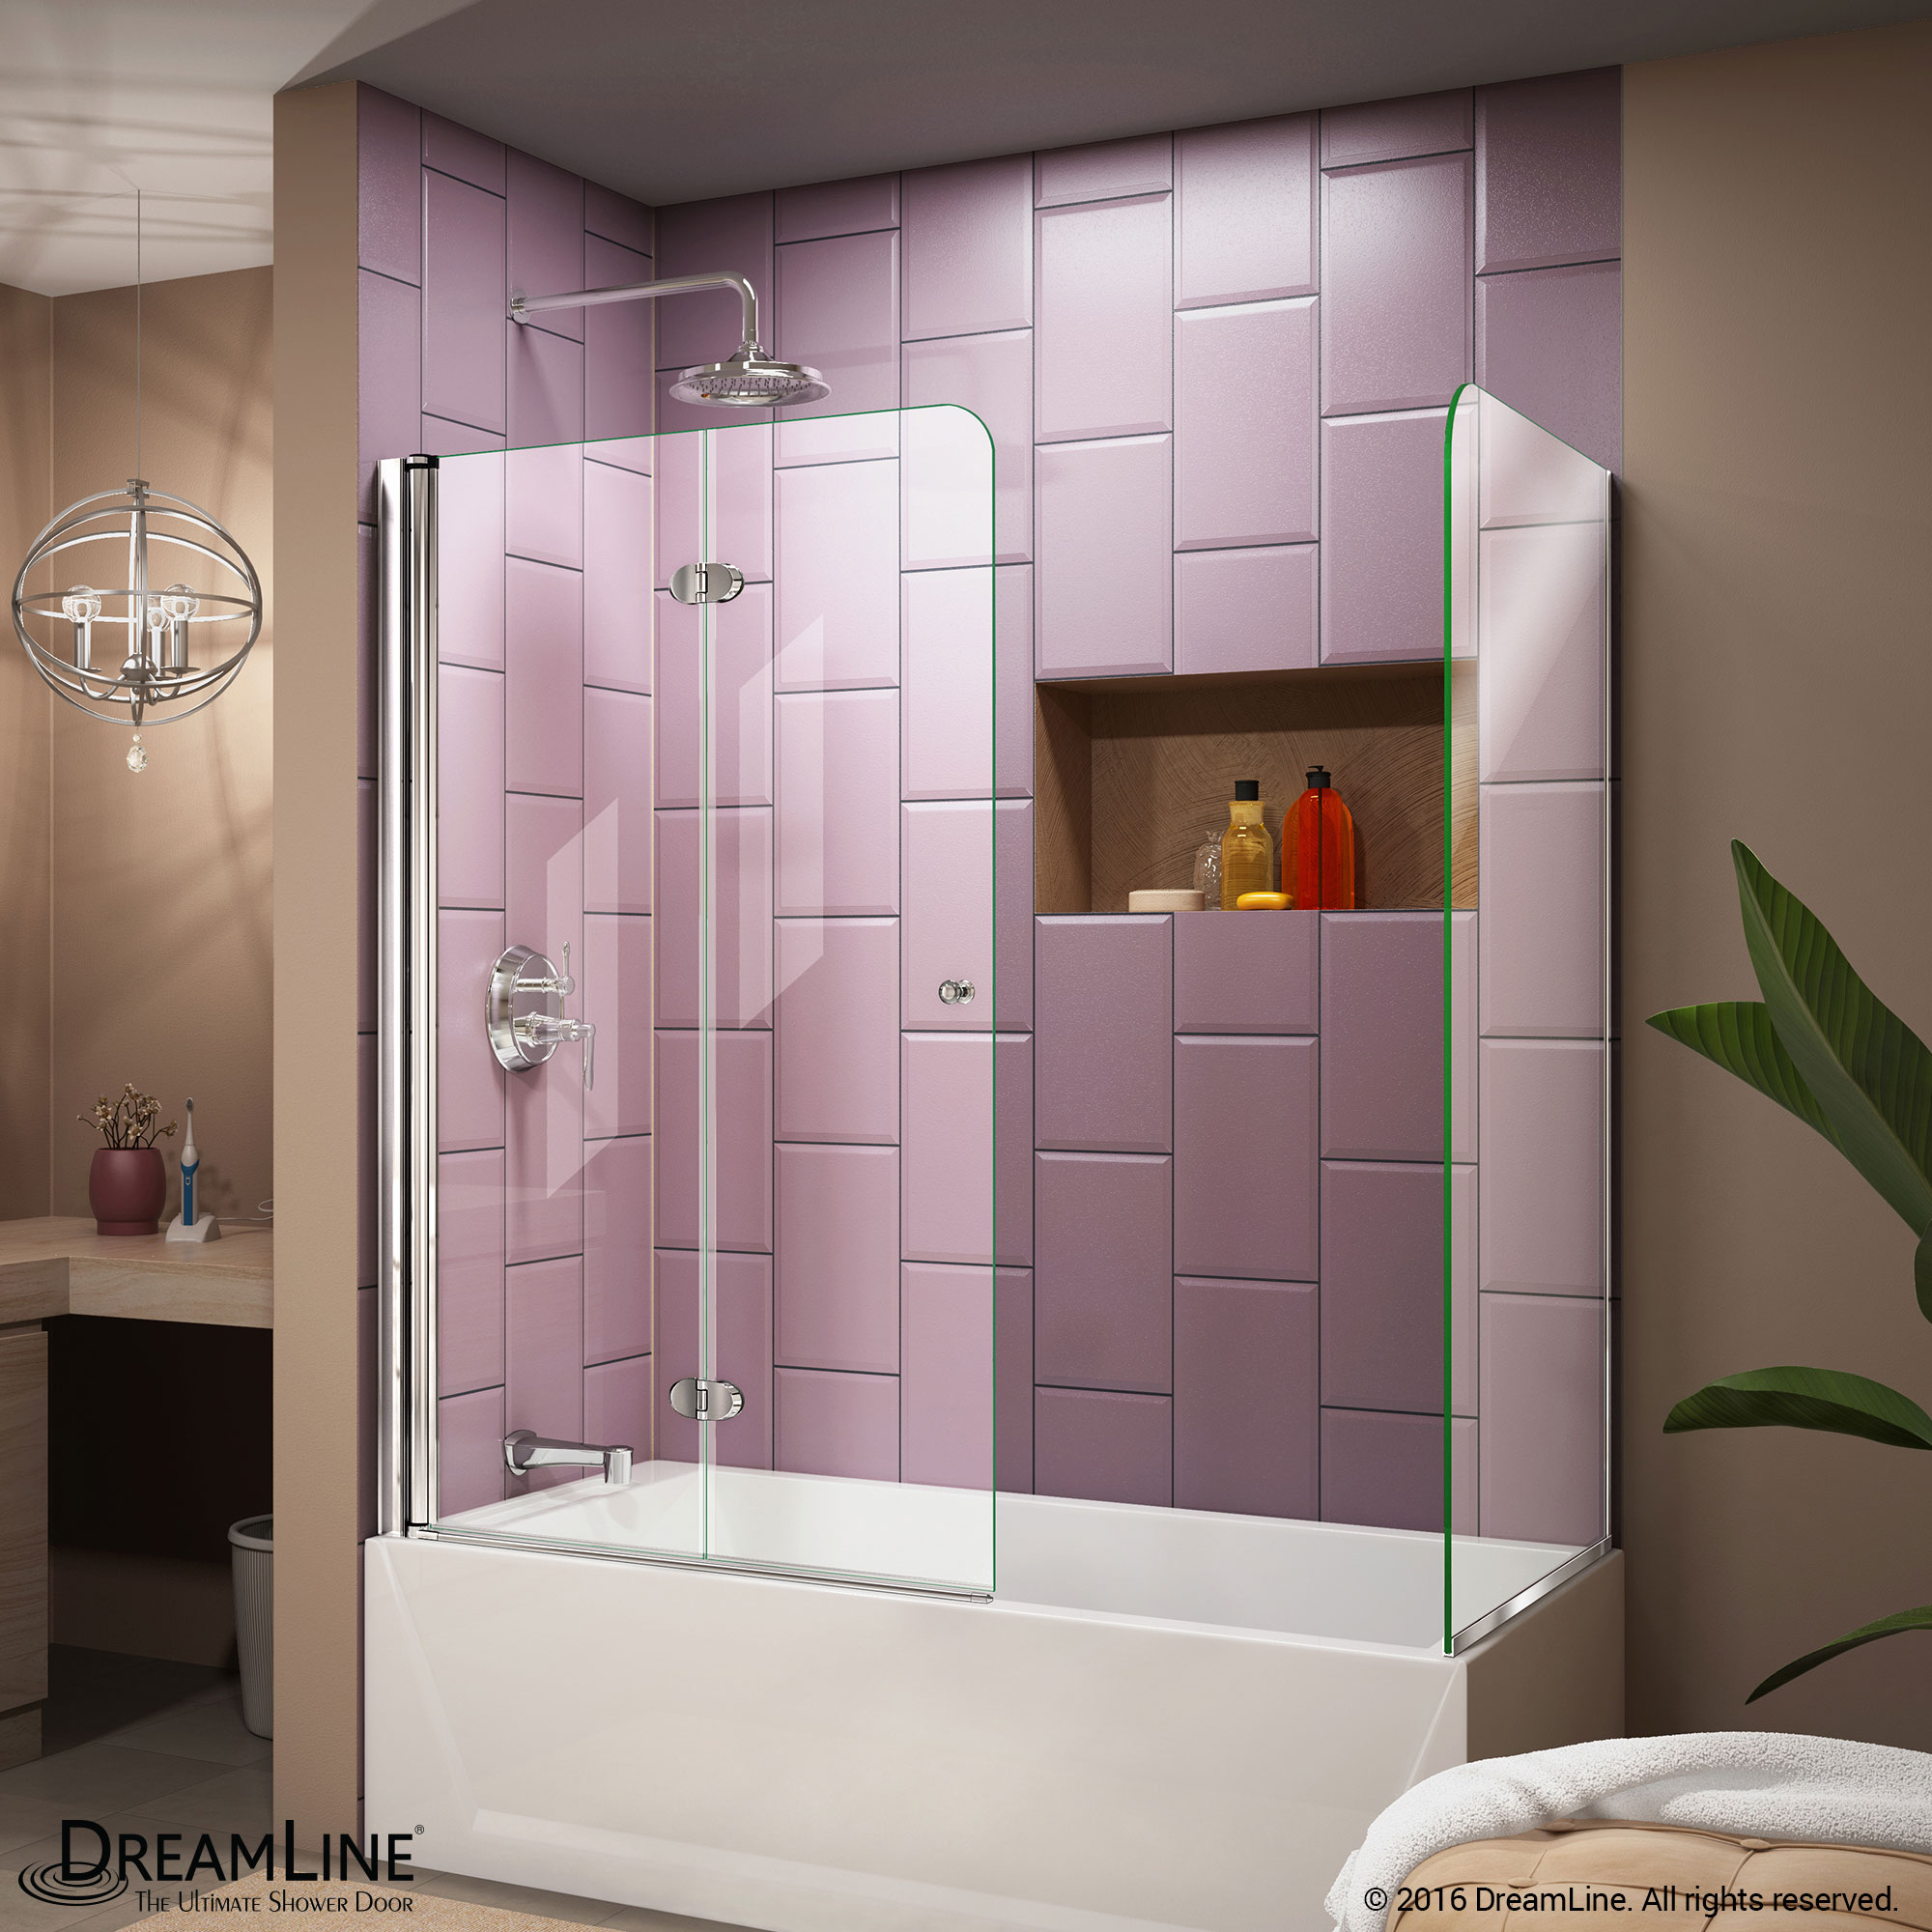 DreamLine SHDR-3636580-RT-01 Aqua Fold 56 to 60 in. W x 30 in. D x 58 in. H Hinged Tub Door